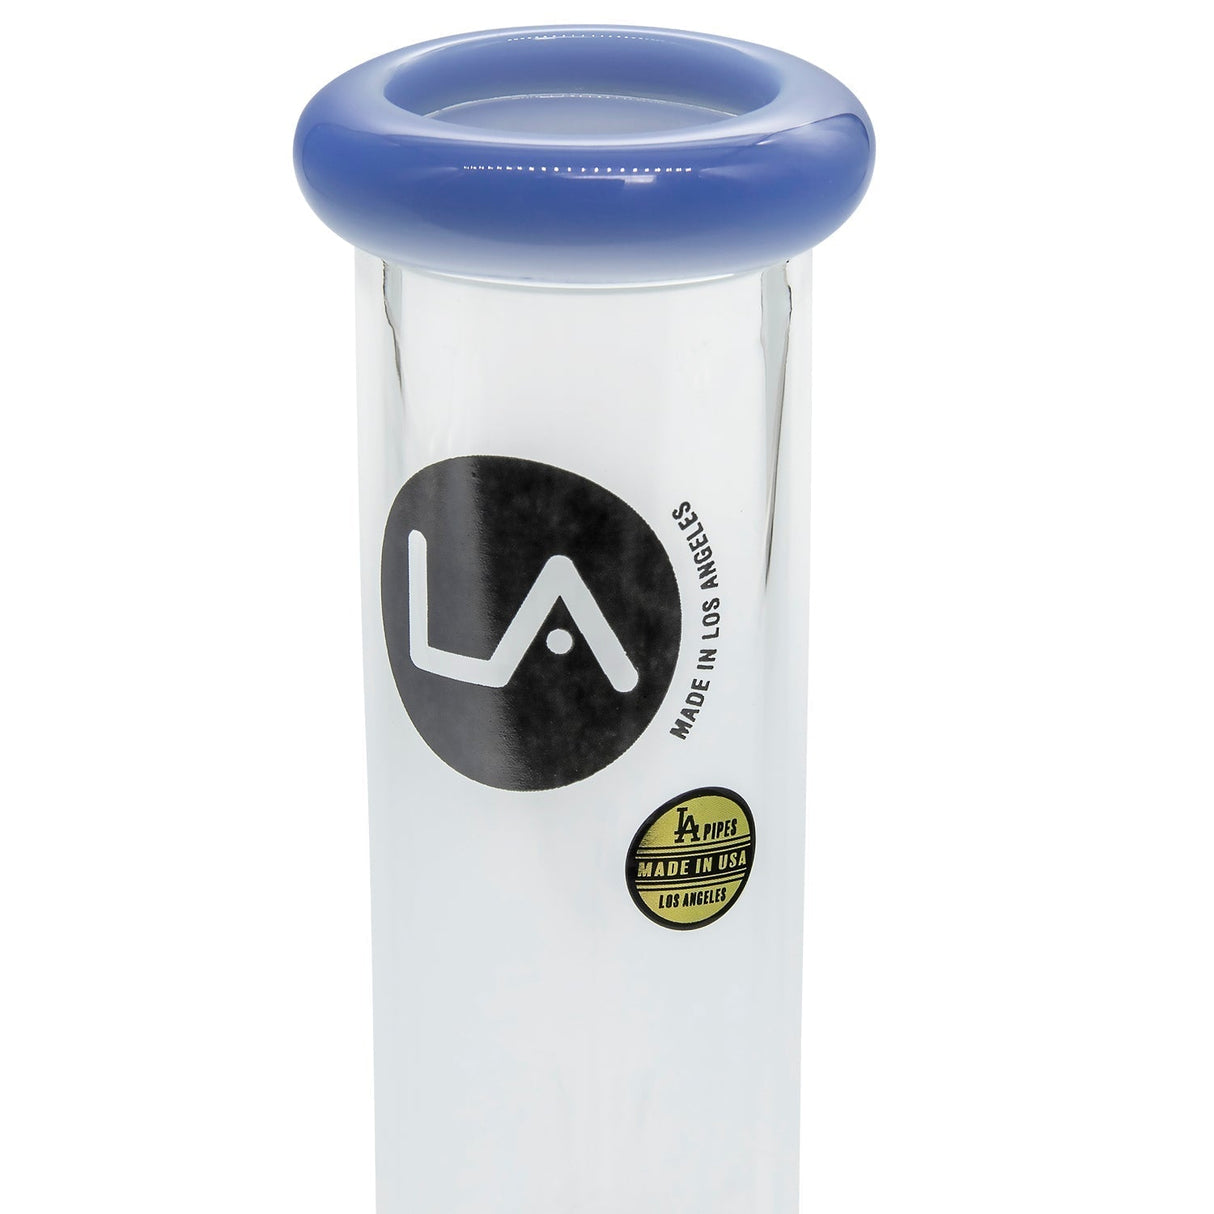 LA Pipes 8" Beaker Bong in blue, front view on white background, borosilicate glass